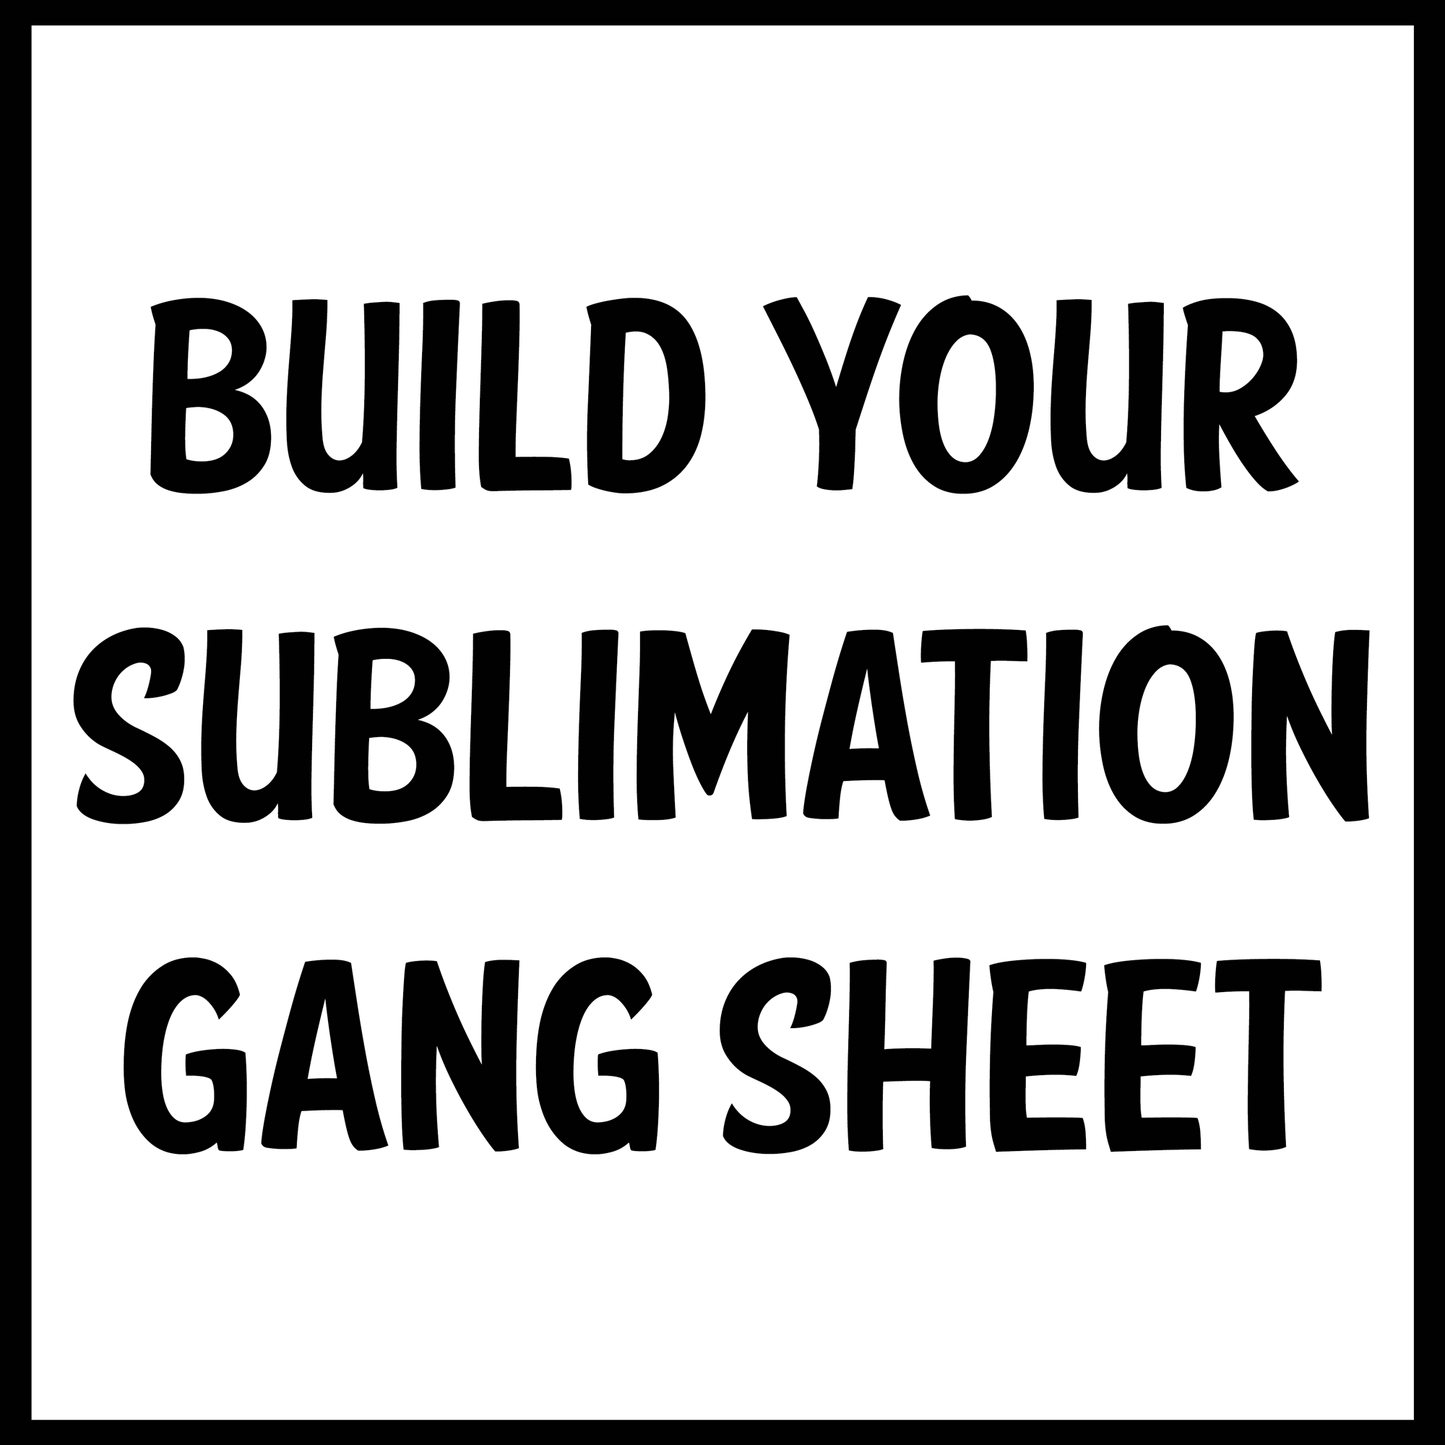 Build Your Own Sublimation Gang Sheet